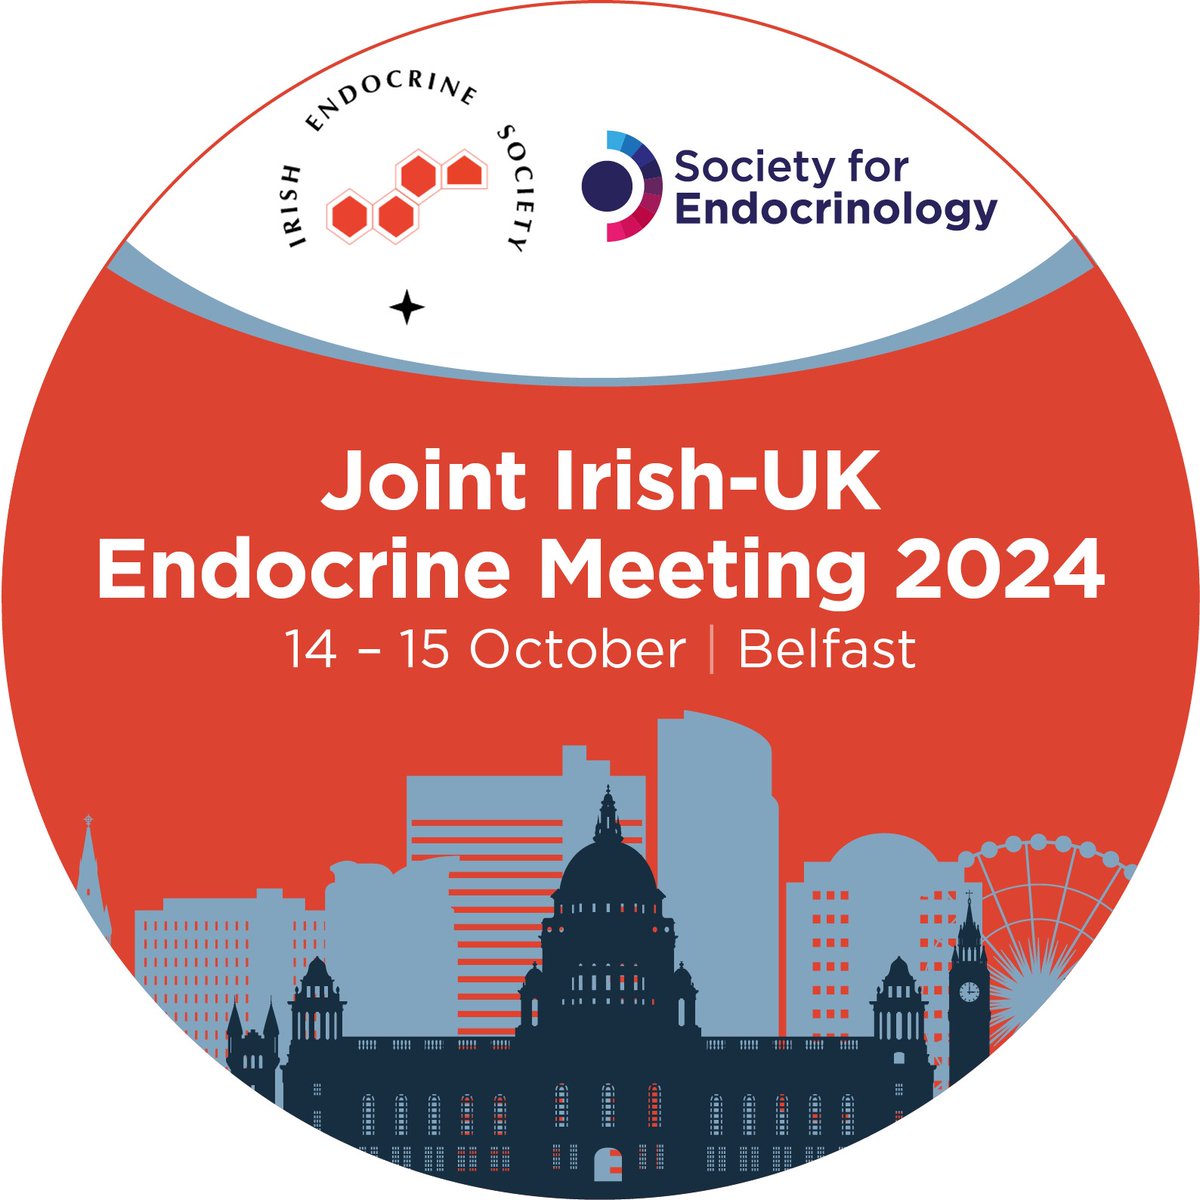 Don't miss out on the chance to submit your abstract for the Joint Irish-UK Endocrine Meeting! Why submit? ✅Present to 600+ experts ✅Gain feedback ✅Network & collaborate ✅Boost your professional profile Submit your abstract by 21 May: endocrinology.org/events/joint-i…